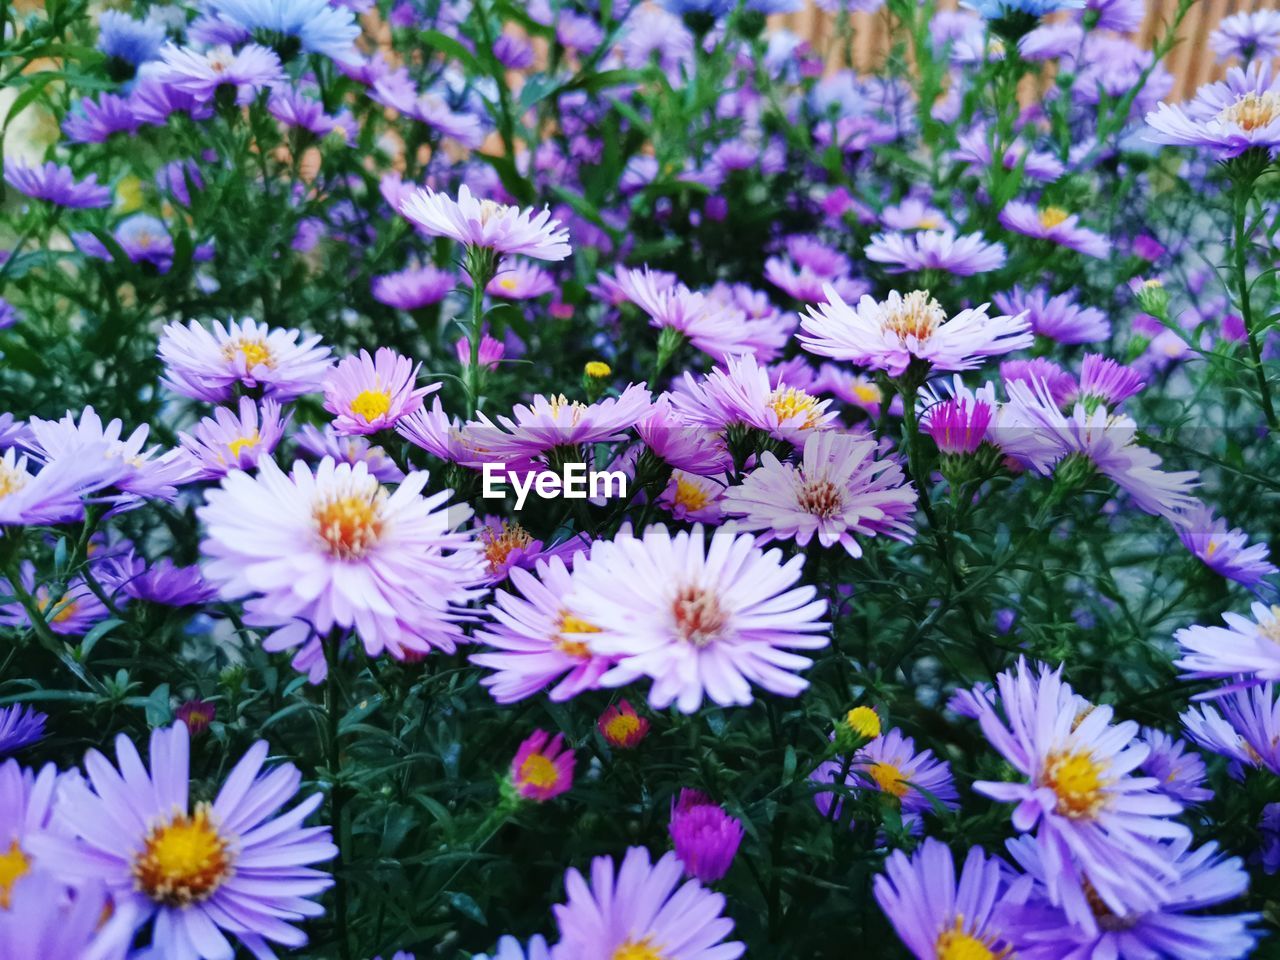 HIGH ANGLE VIEW OF PURPLE DAISIES ON FIELD